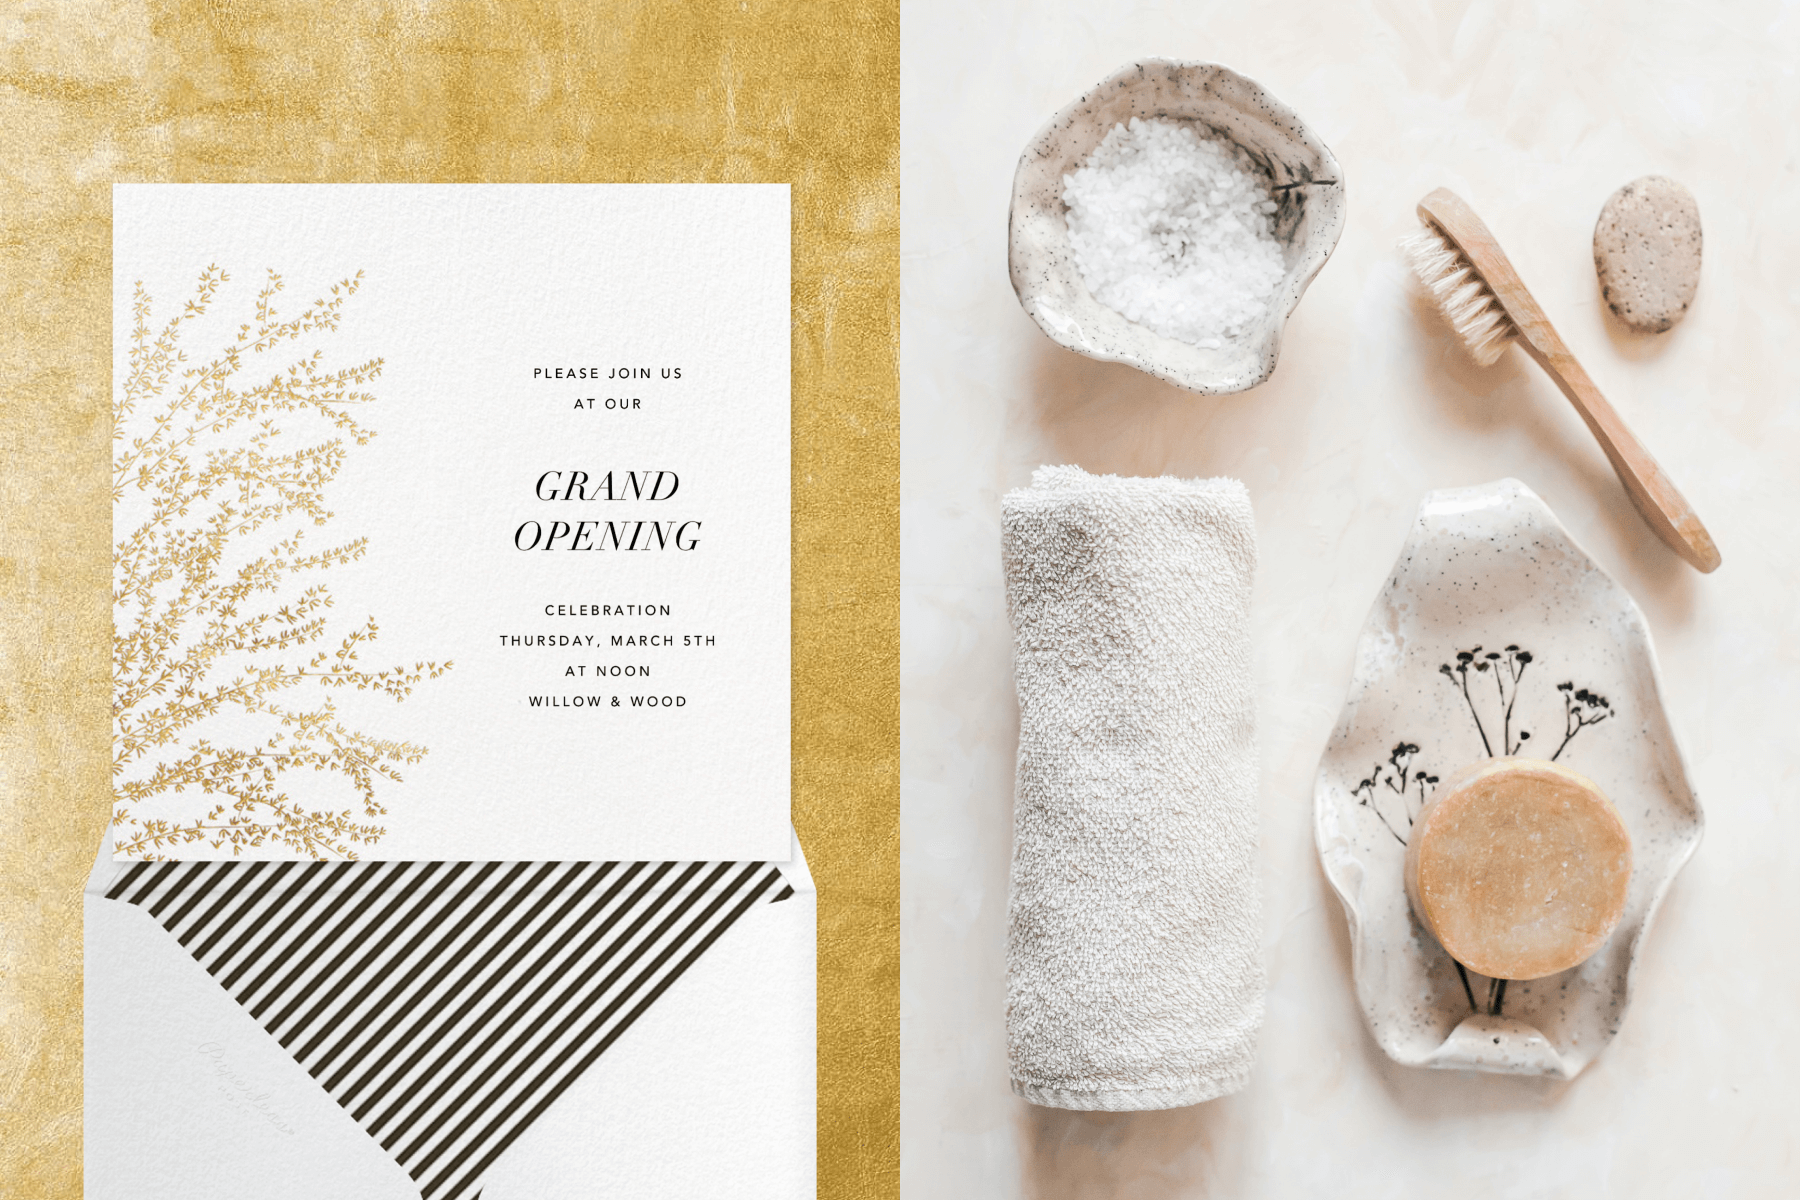 Left: An invitation with gold branches coming from the left side. Right: Spa accessories - A hand towel, salt cellar and brush, soap, and pumice stone.